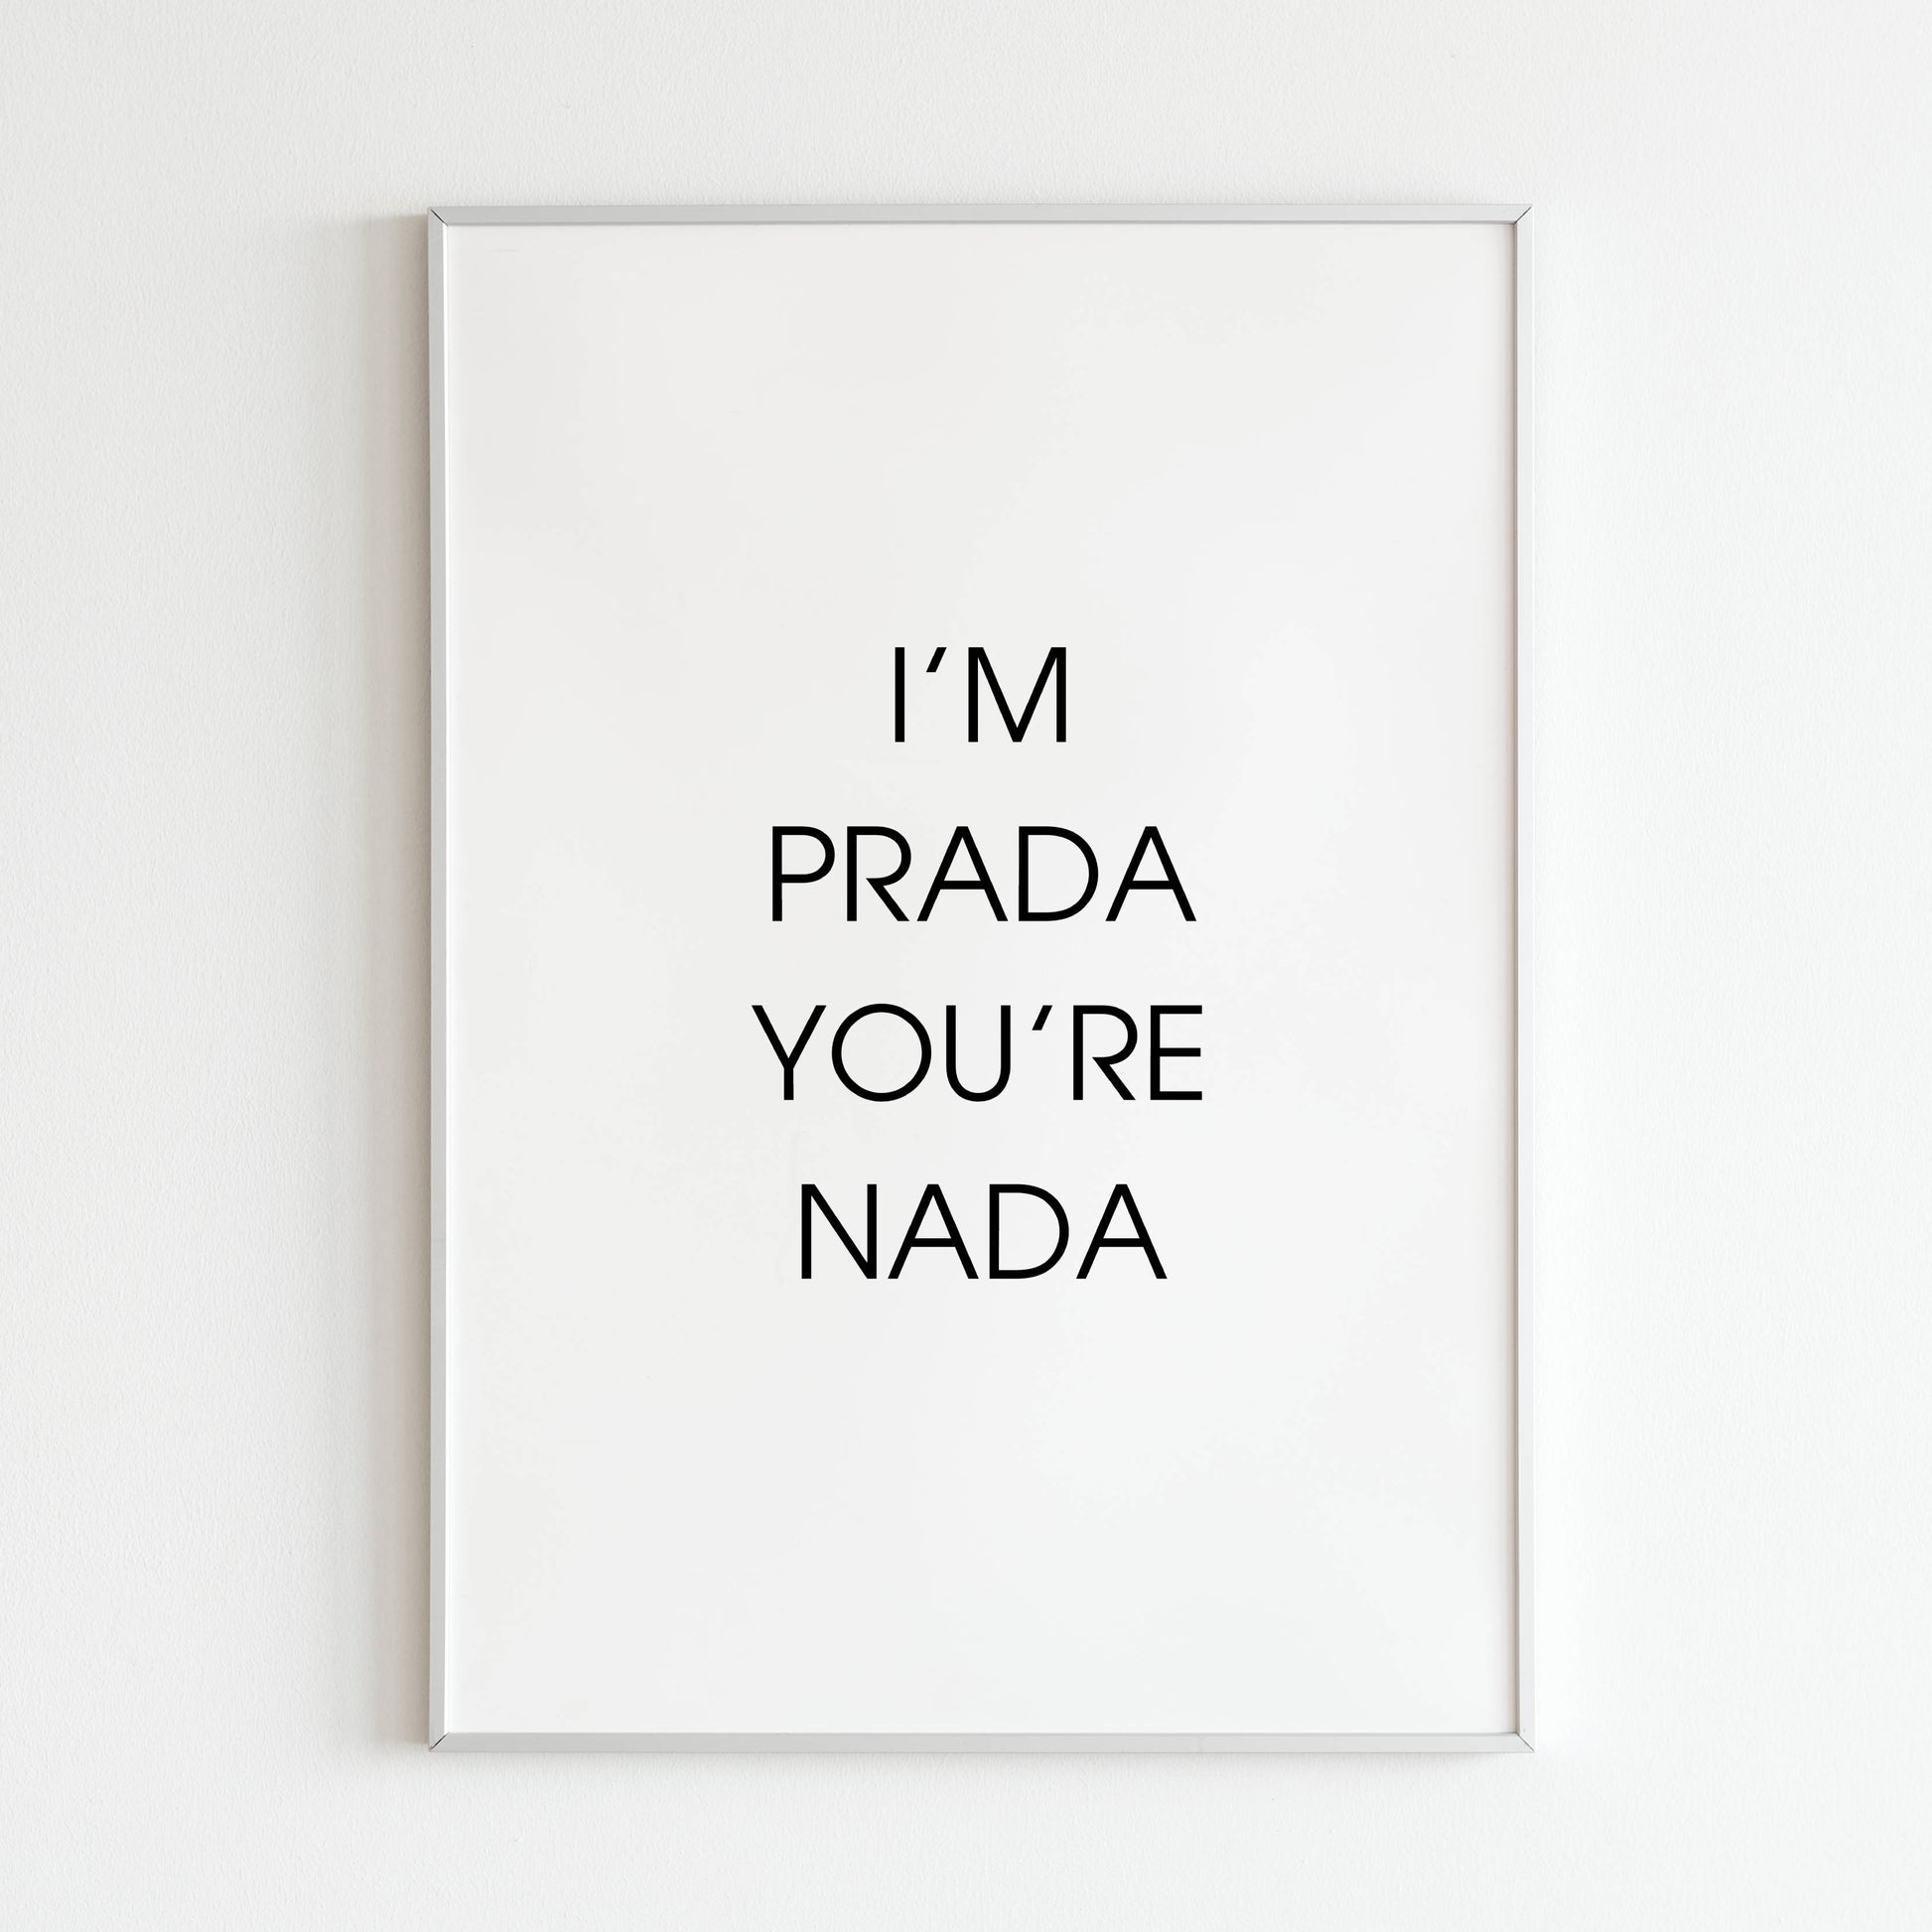 Downloadable "I'm prada you're nada" wall art for a bold and sassy statement (consider potential trademark issues).